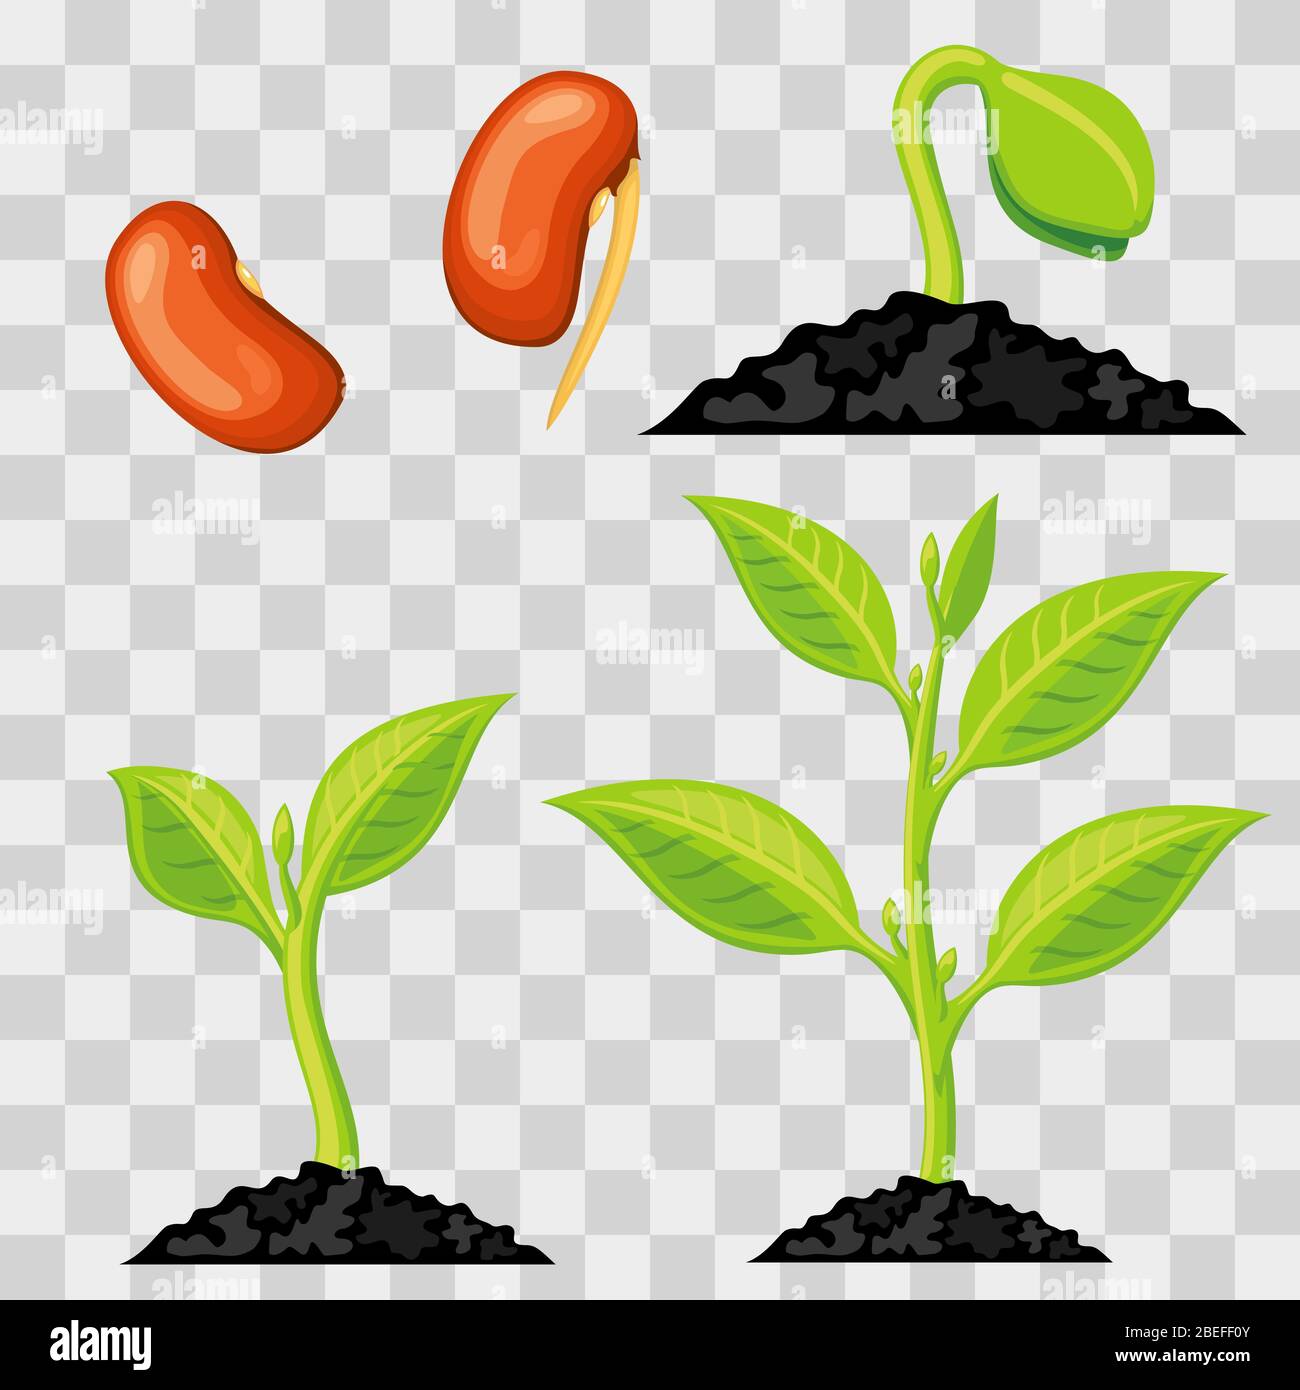 Plant growth stages from seed to sprout isolated on transparent background. Vector illustration Stock Vector